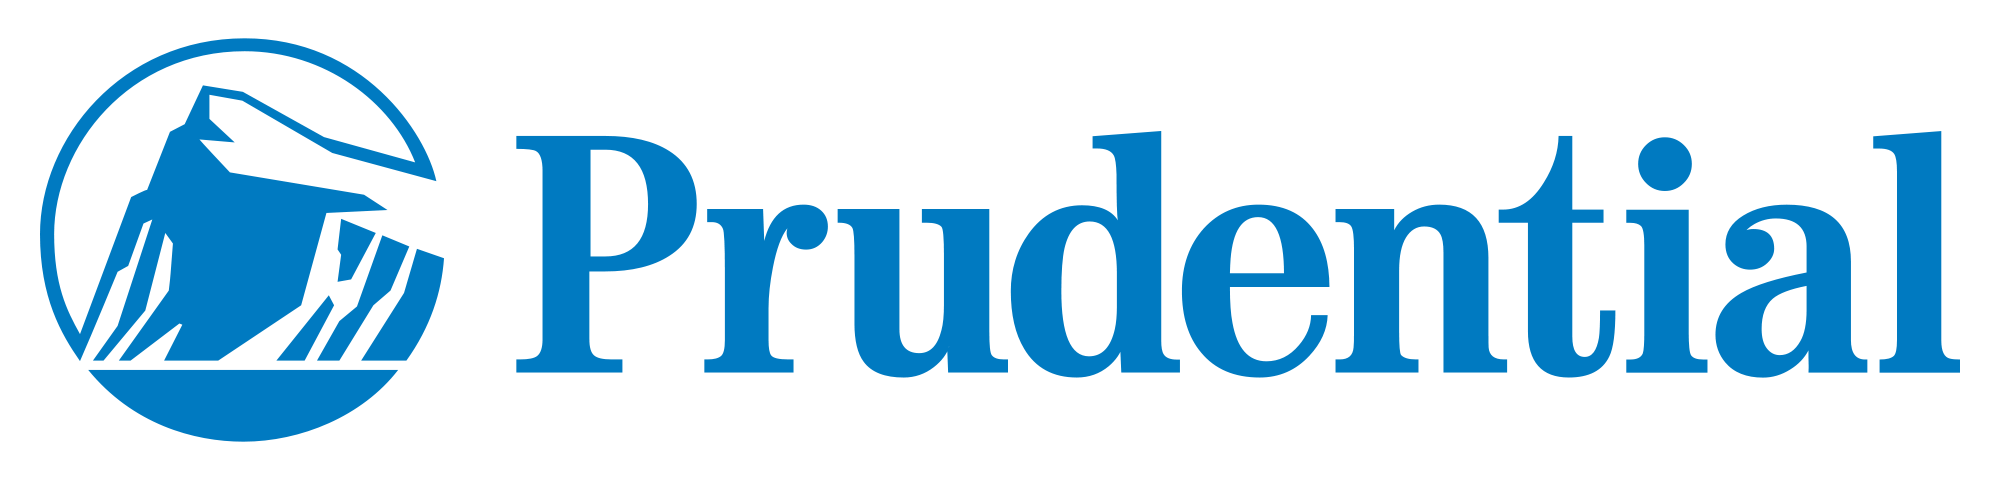 Prudential-logo.png